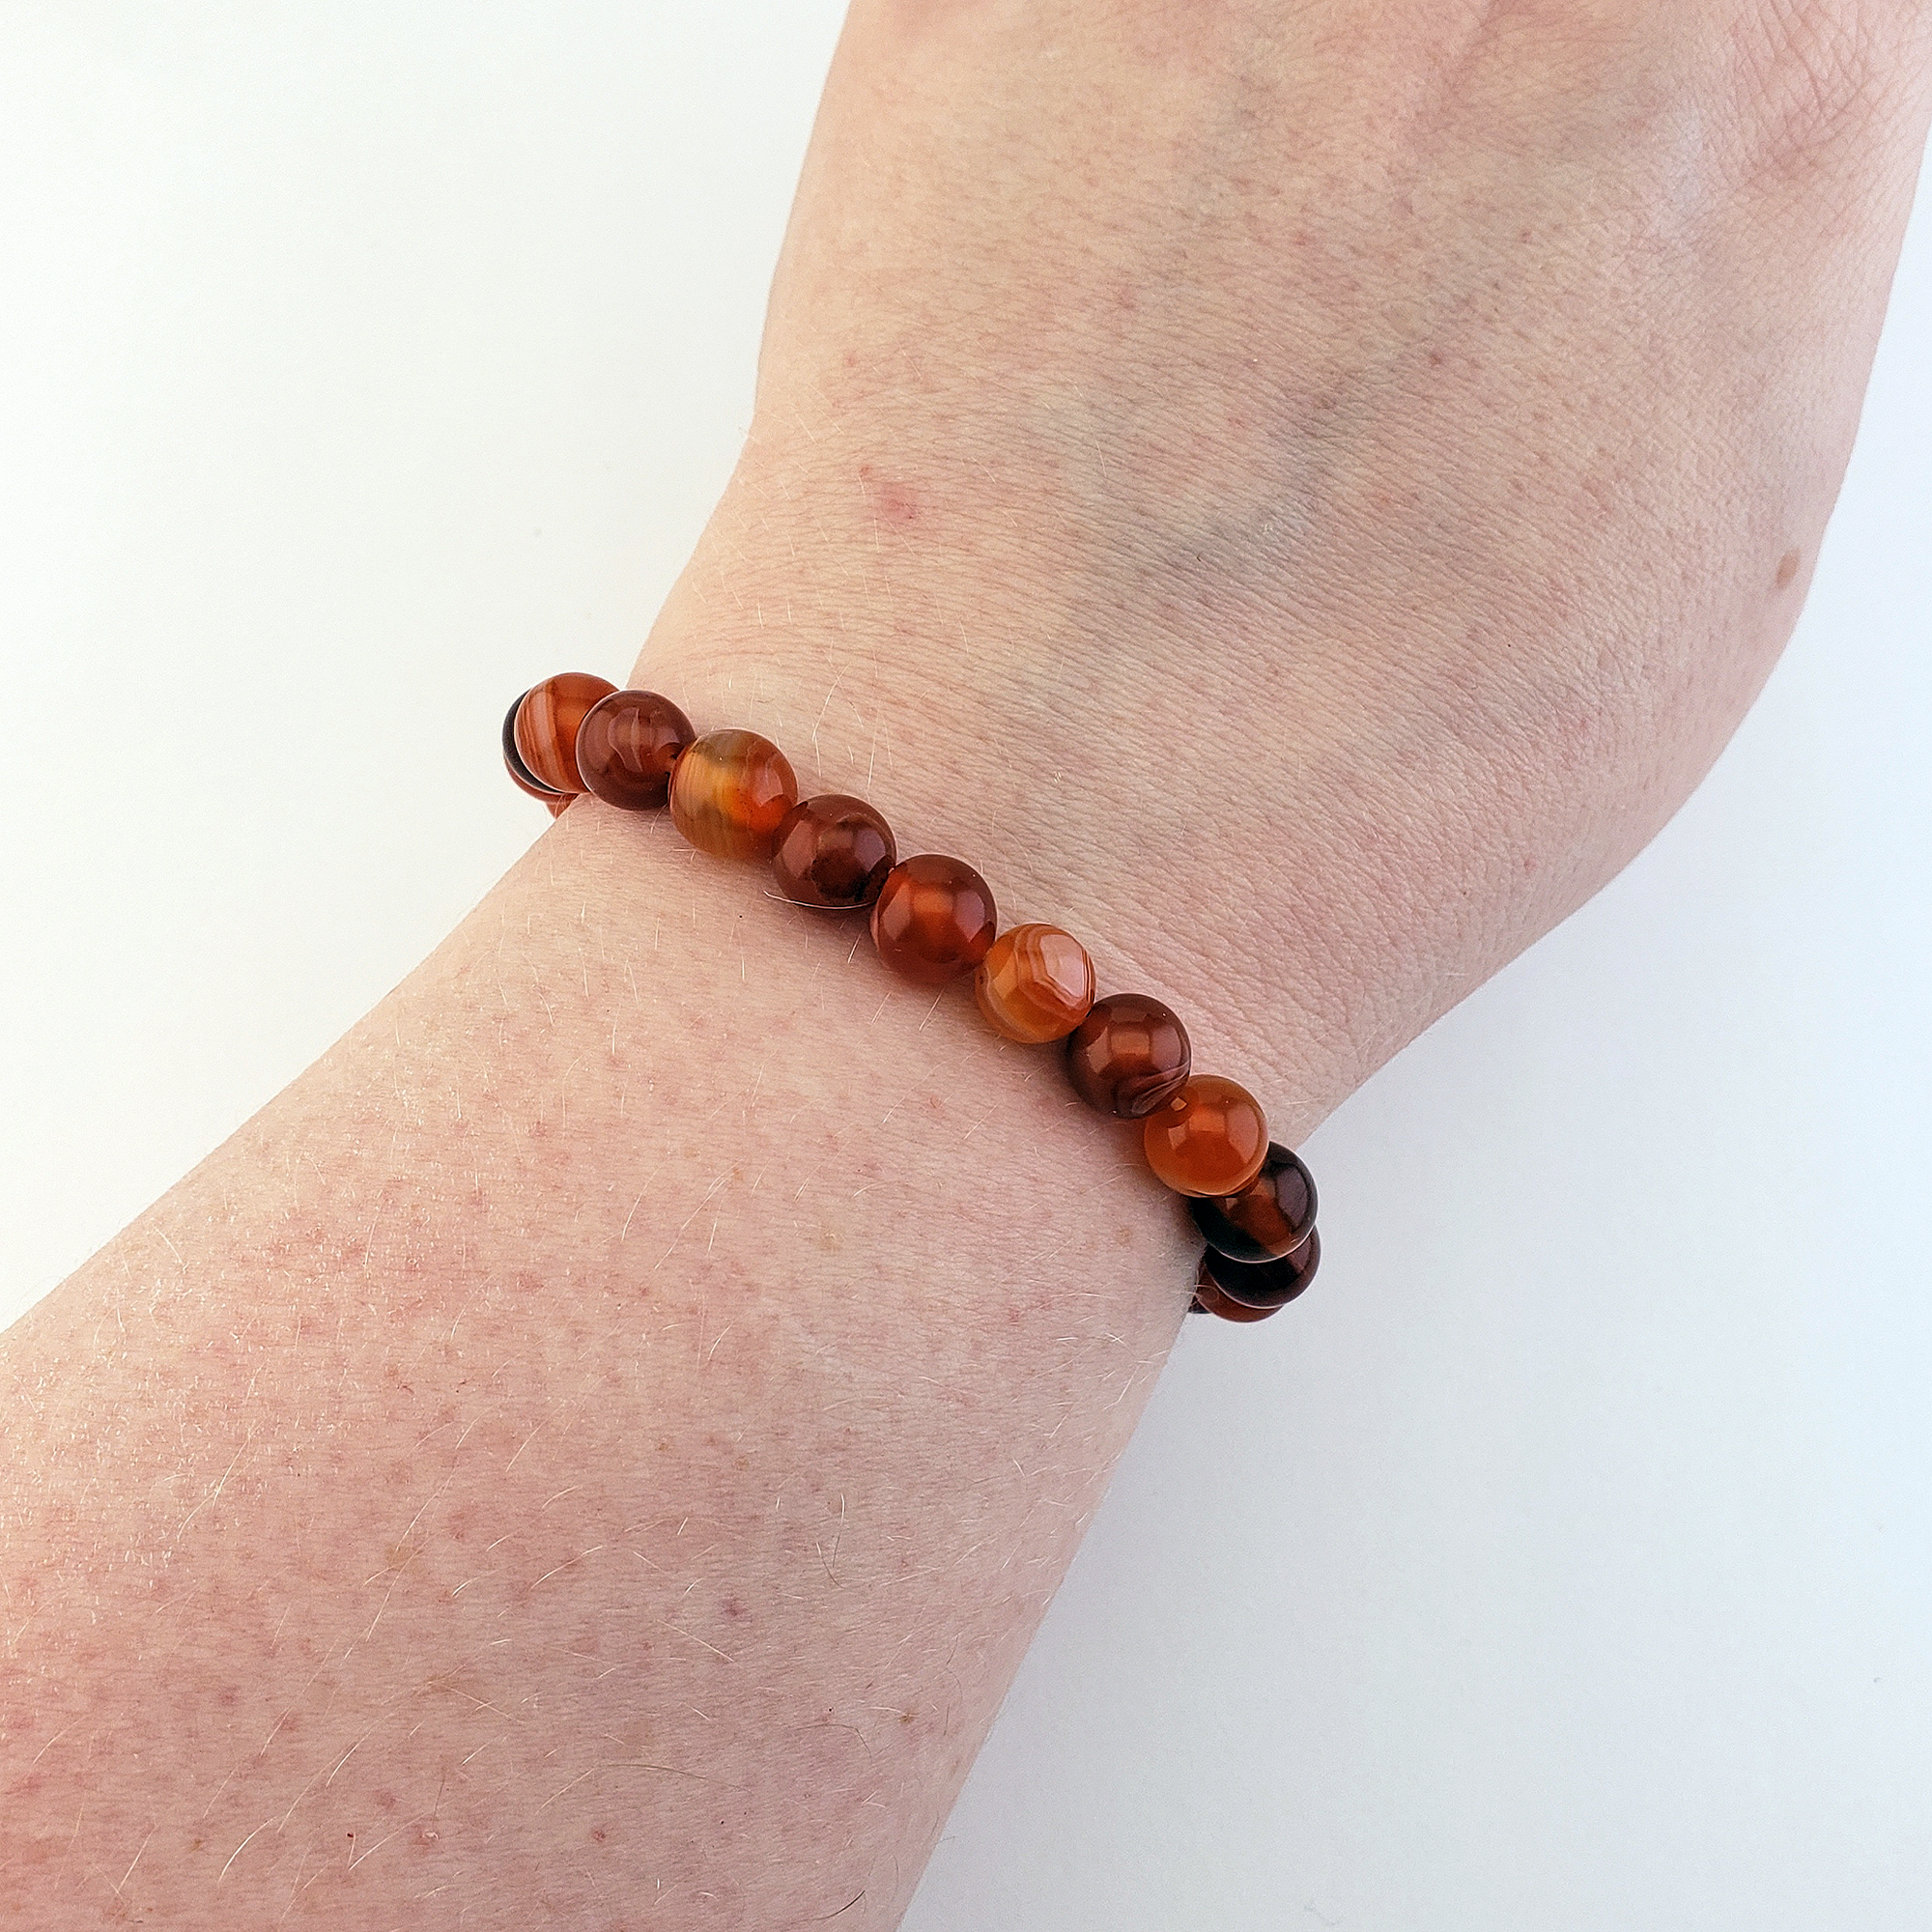 Natural Red Agate Crystal 7-8mm Bead Bracelet - On Wrist Over White Background